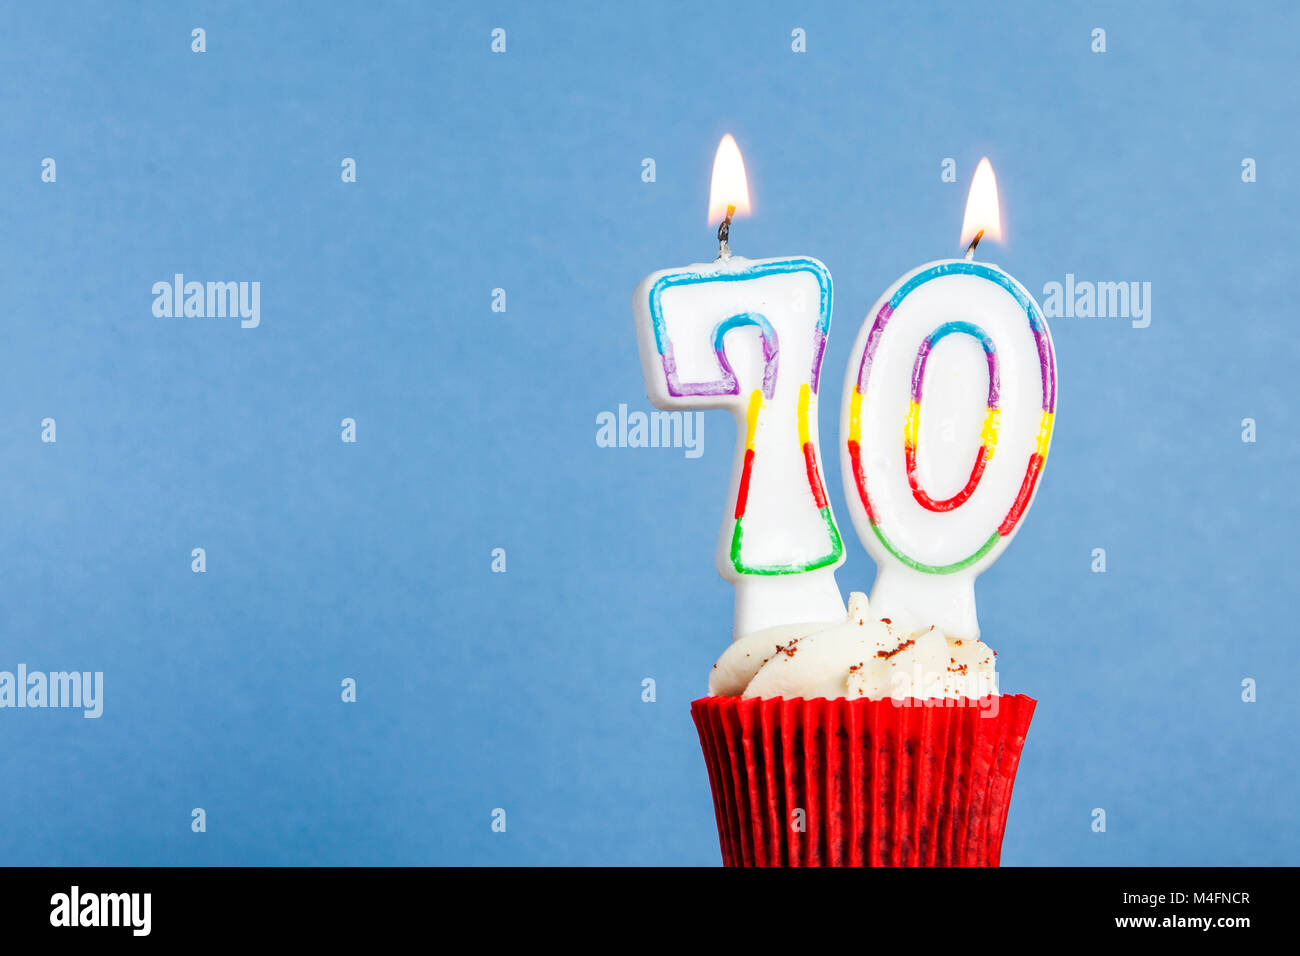 Number 70 birthday candle in a cupcake against a blue background Stock Photo